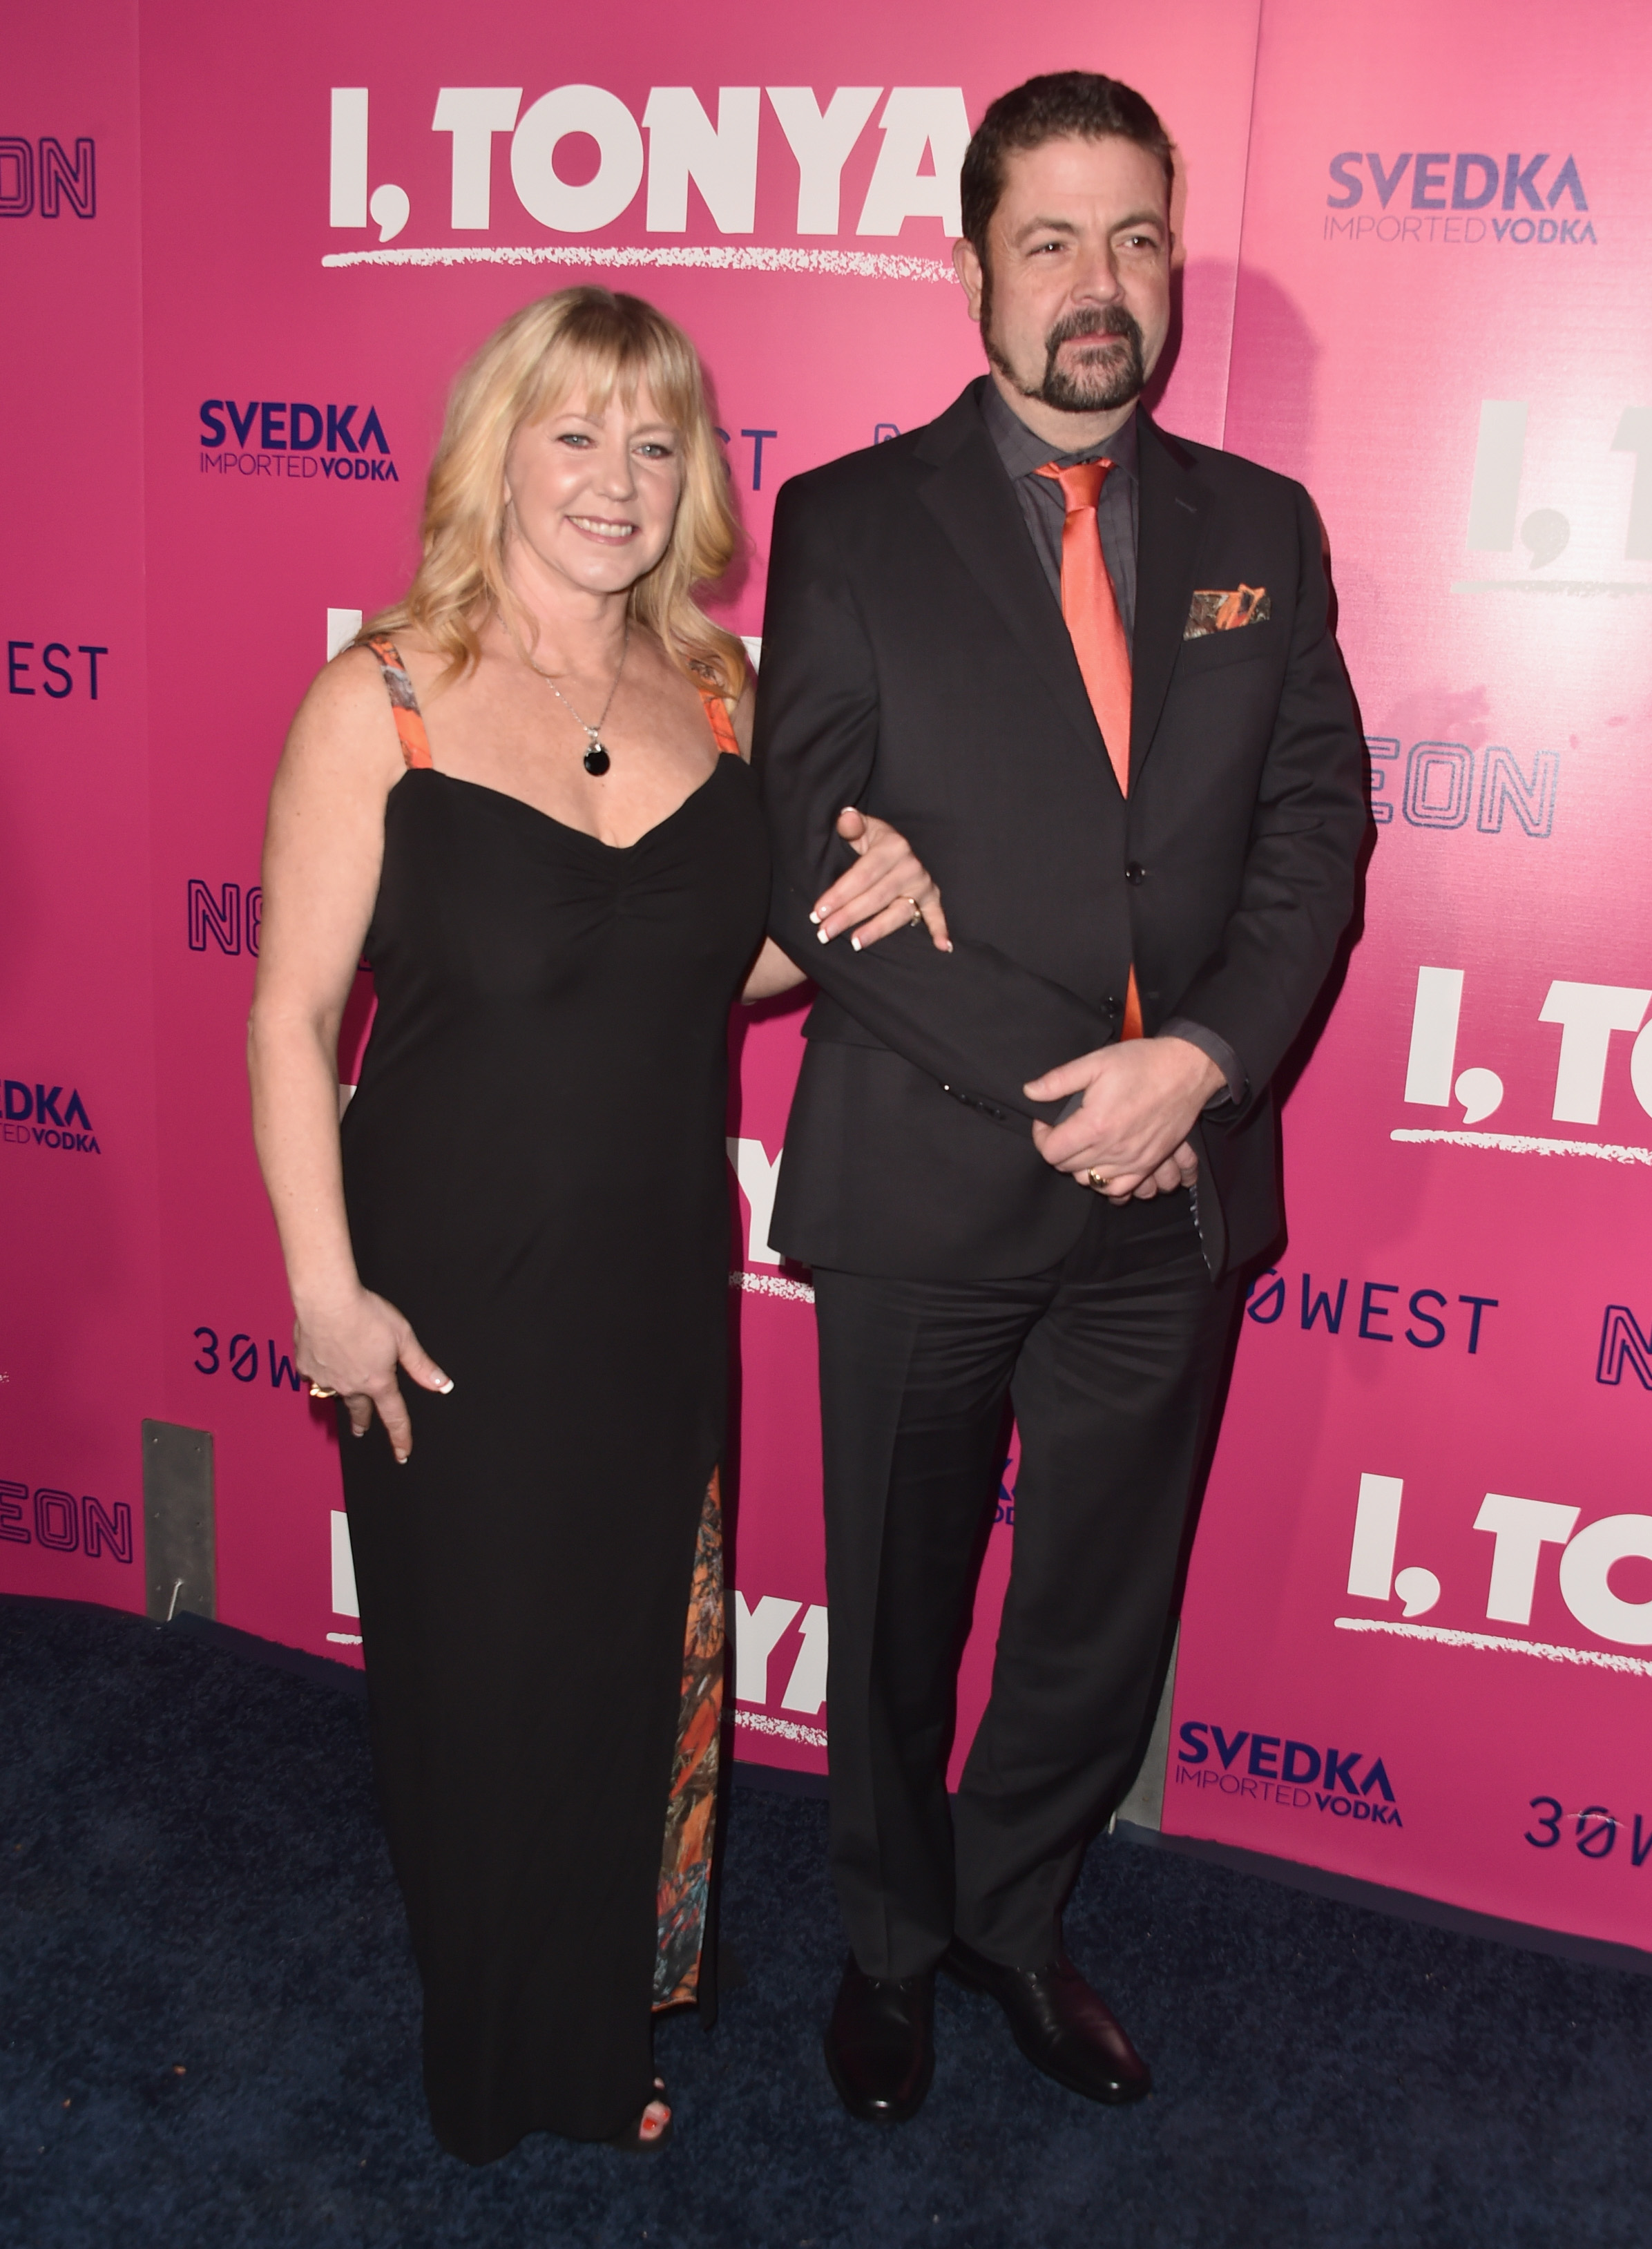 Tonya Harding and Joseph Jens Price at the premiere of "I, Tonya" on December 5, 2017, in Hollywood, California. | Source: Getty Images